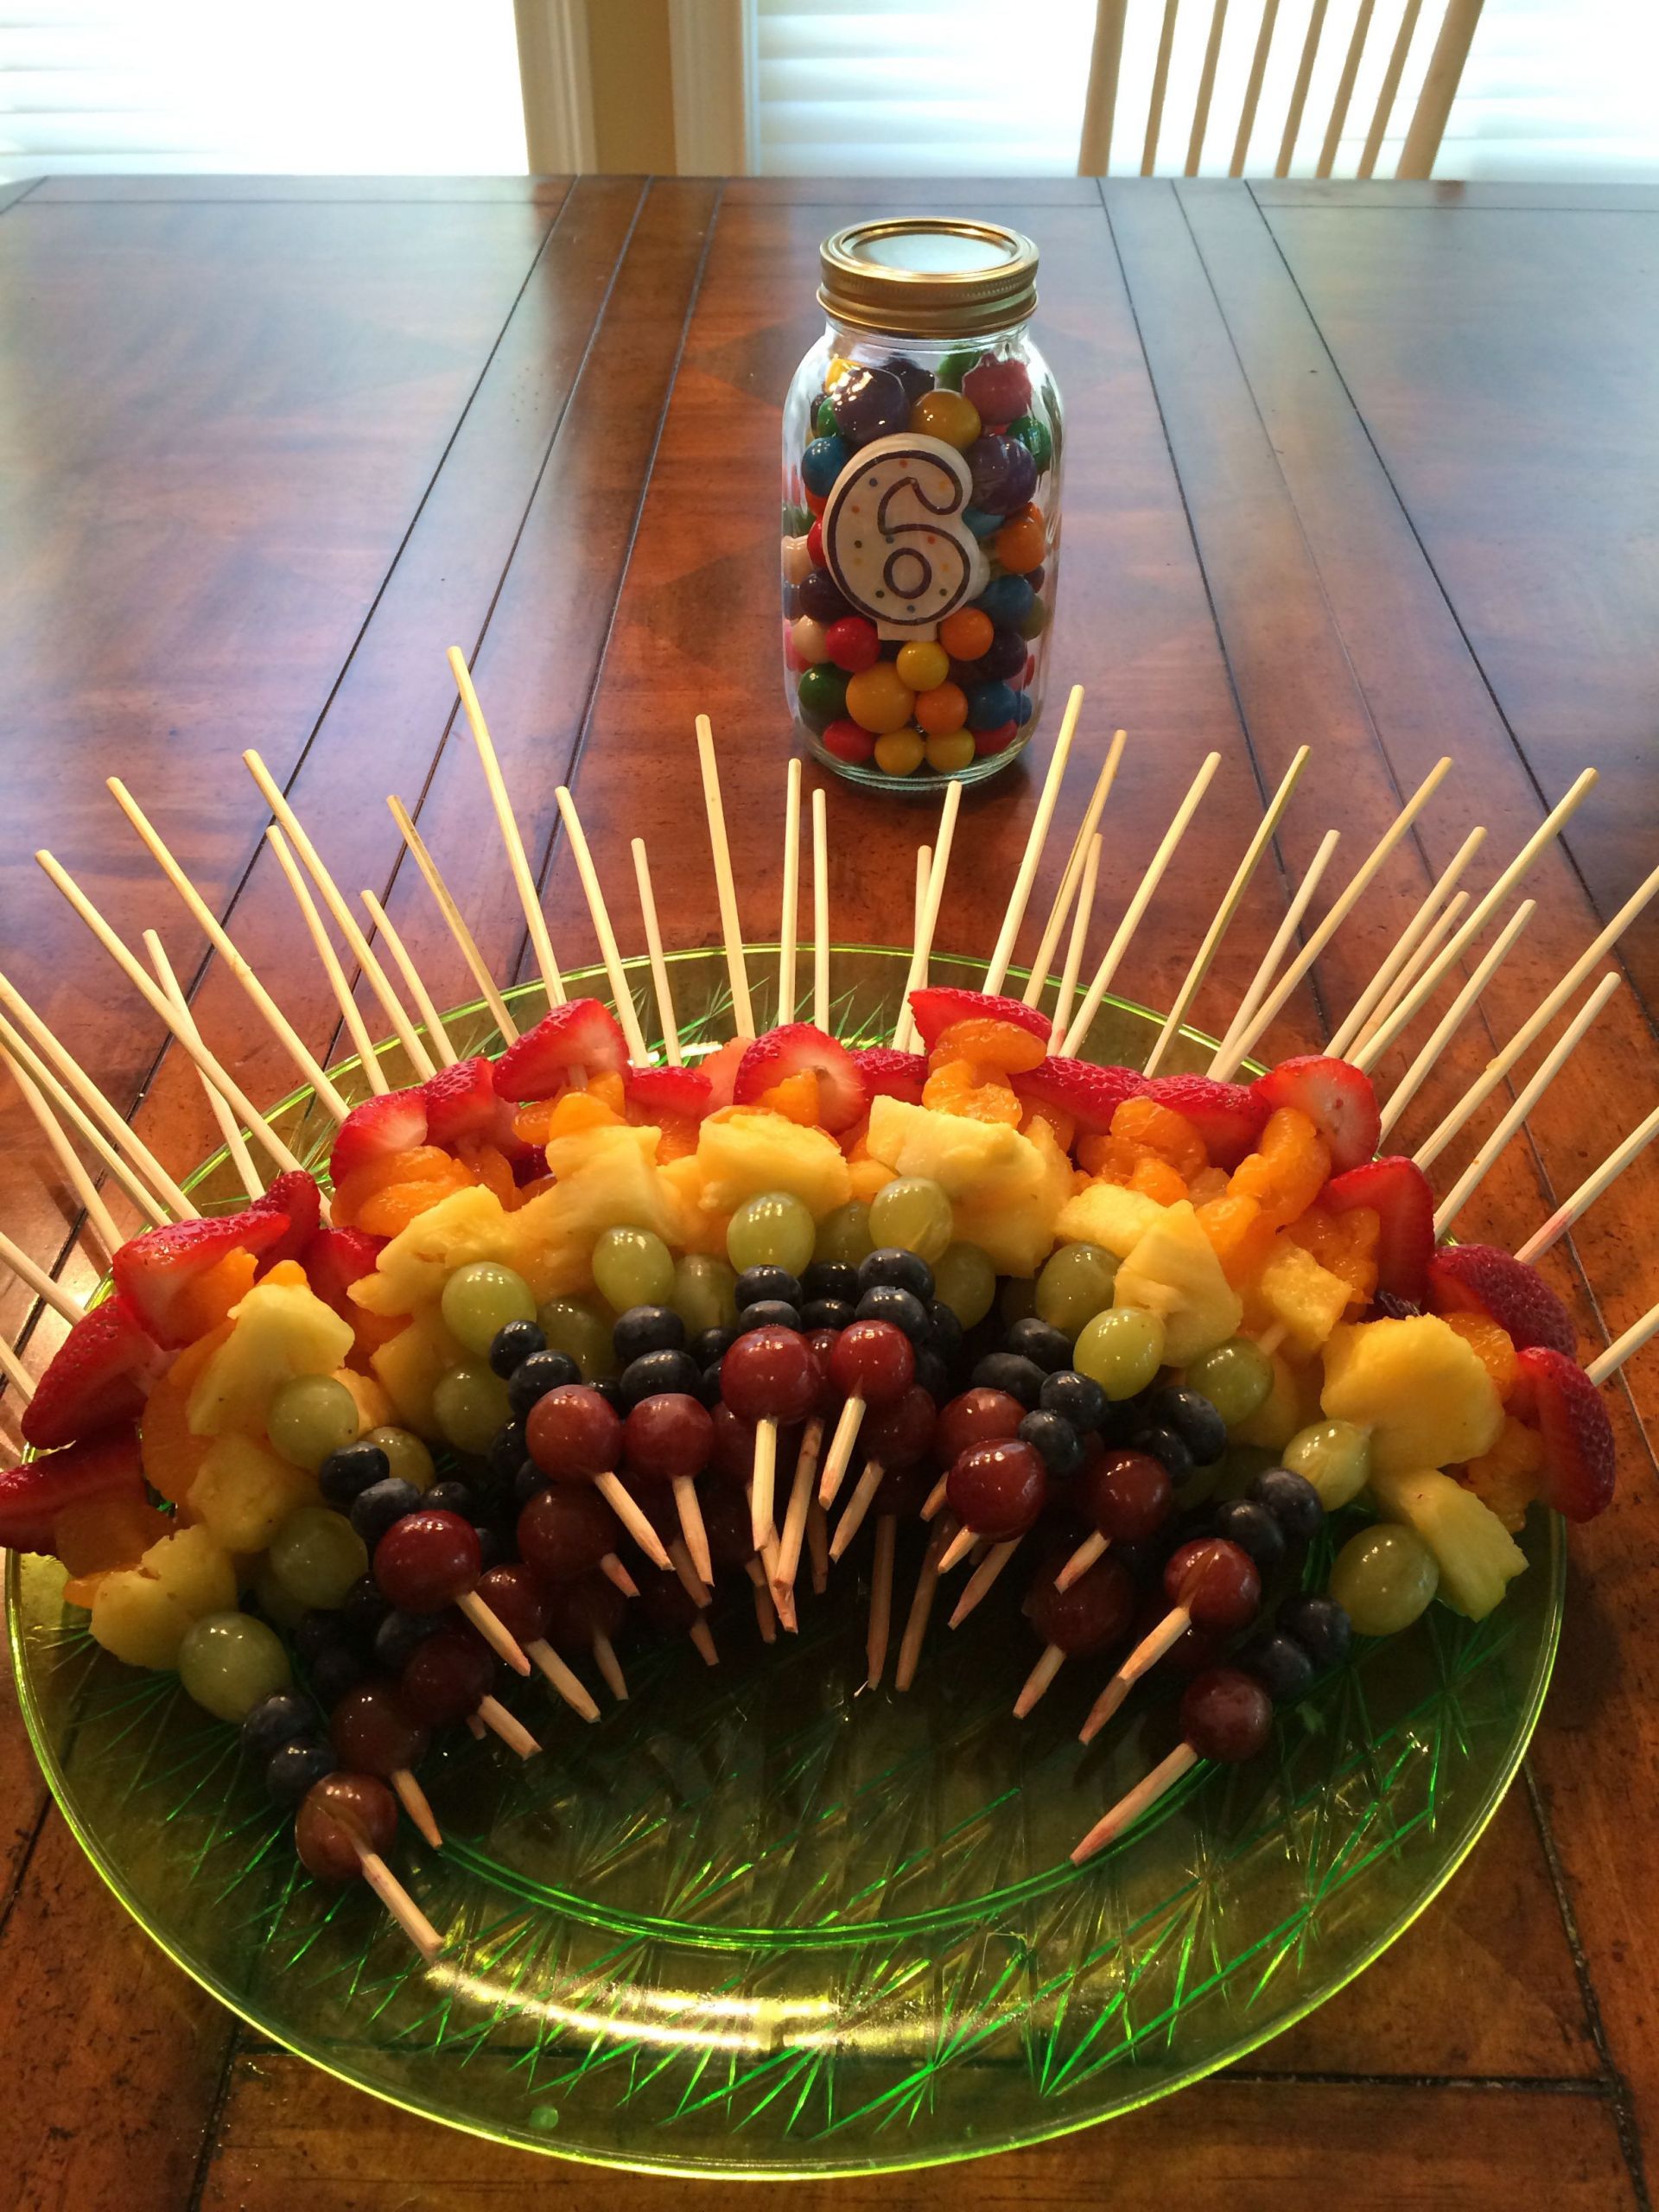 Pool Party Food Ideas For Teenagers
 Pin on Pool party inspired by Pinterest